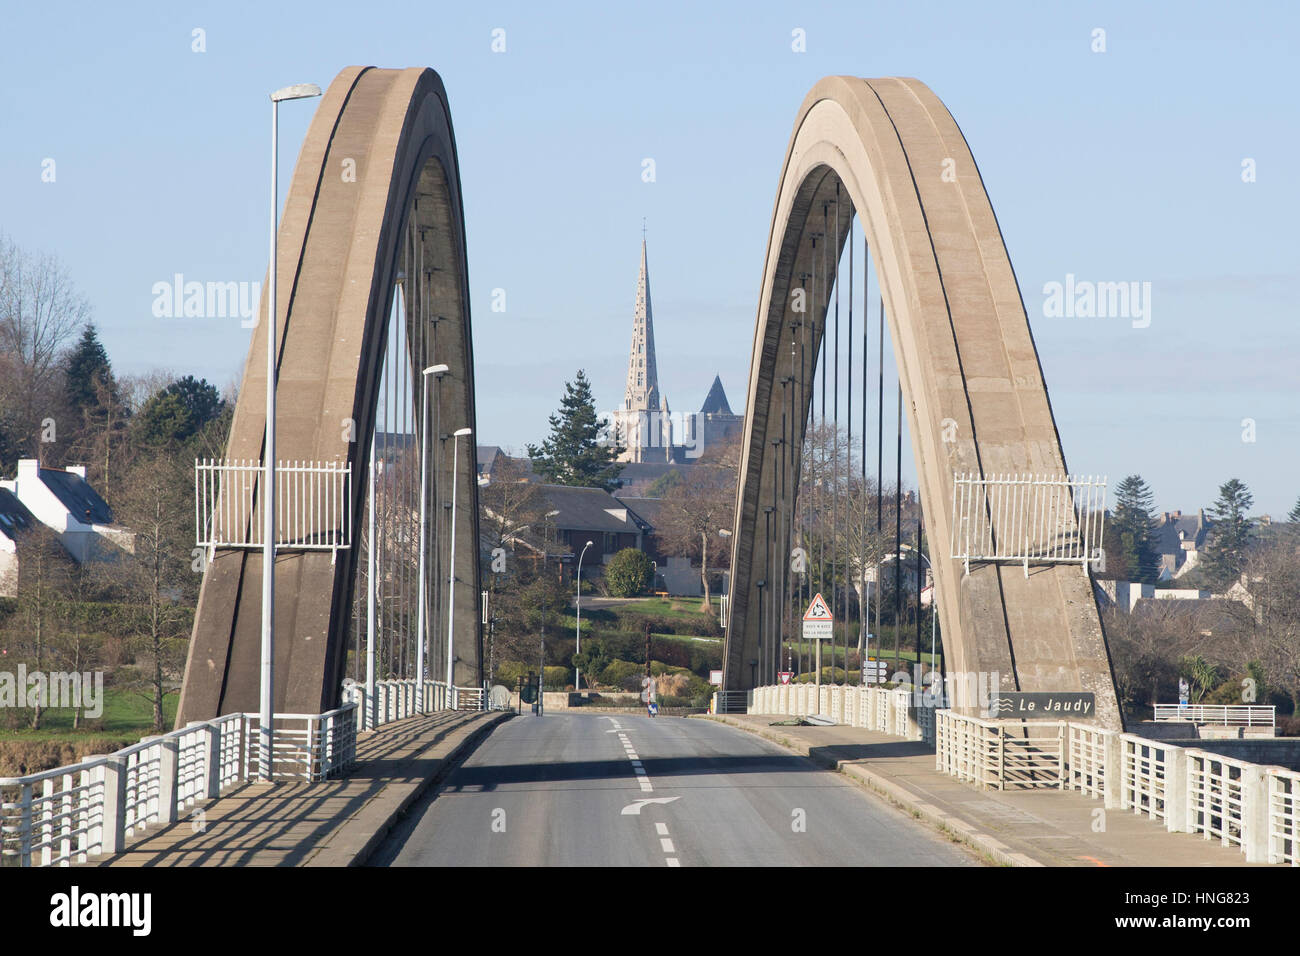 1954 bridge, Le Pont Canada over the Jaudy River and the steeple of gothic cathedral dedicated to Saint Tugdual at Treguier, France Stock Photo